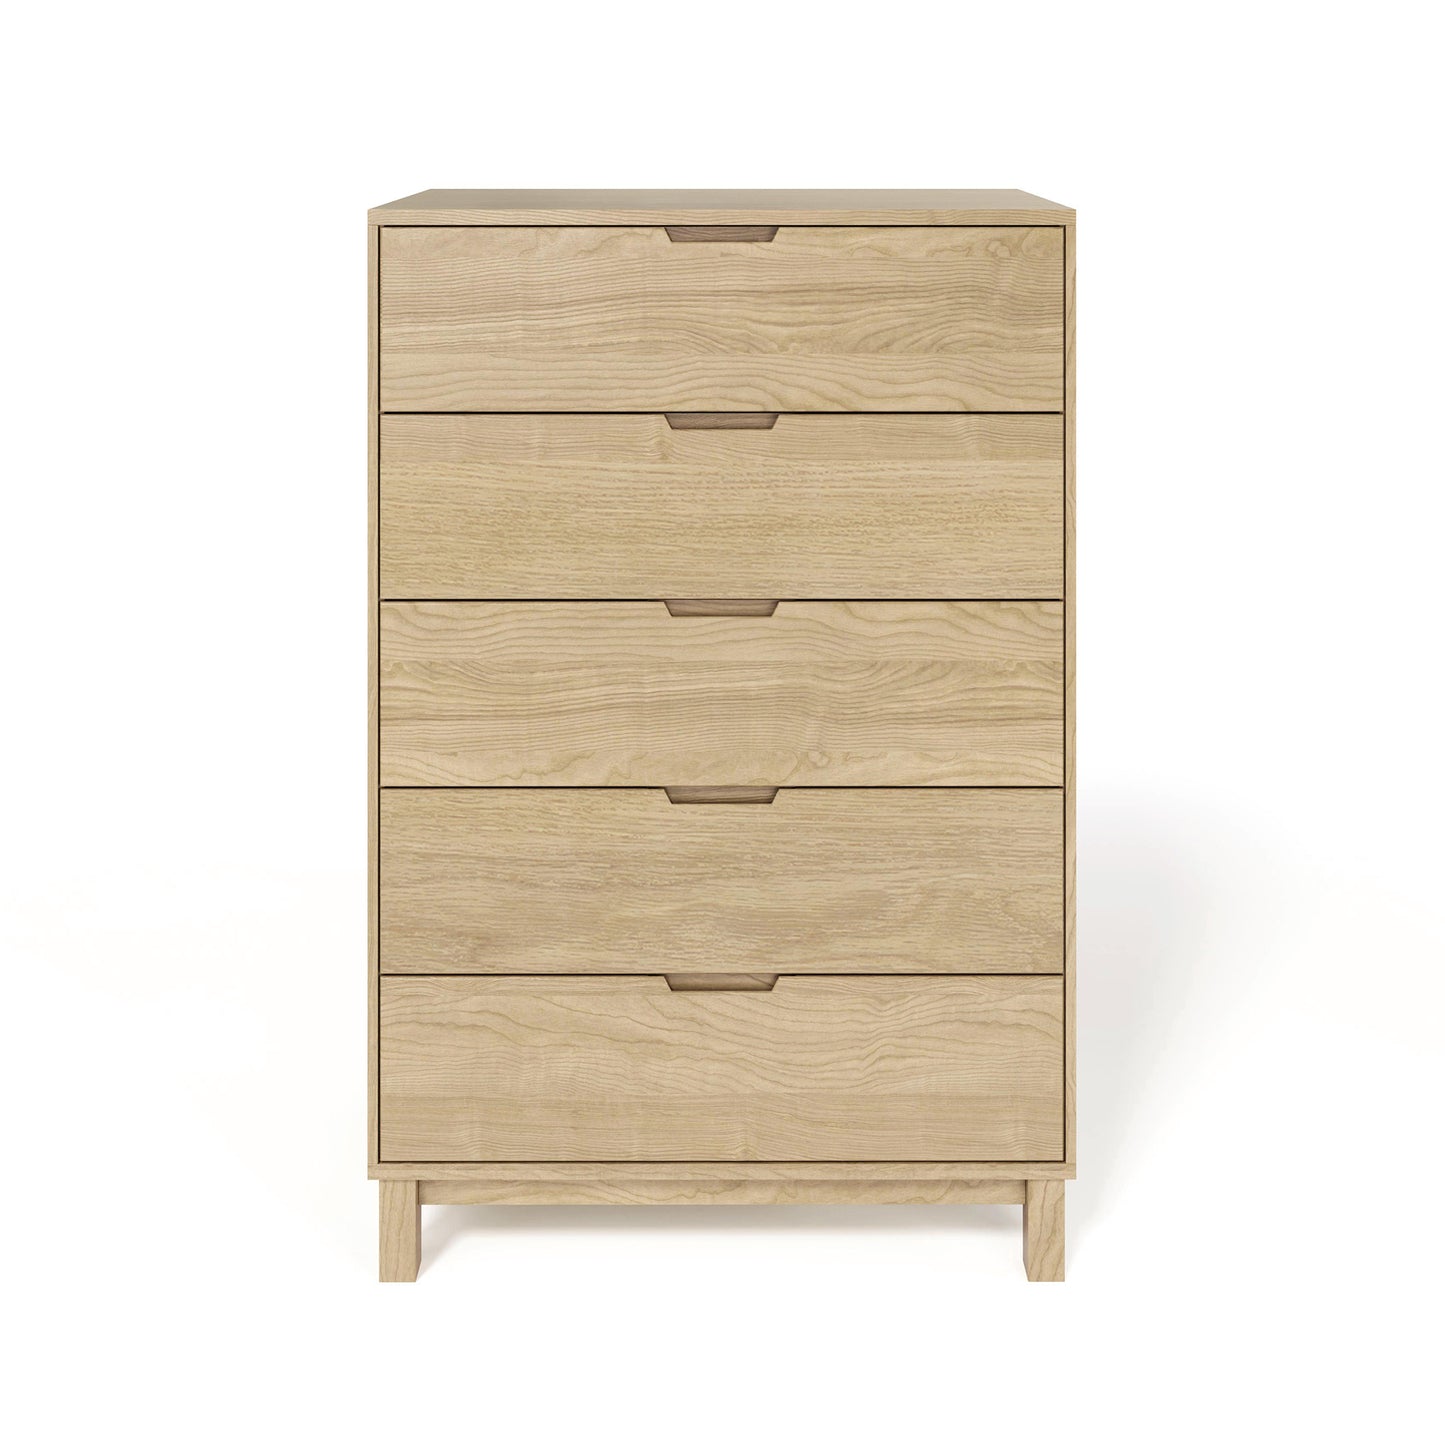 A solid oak hardwood Oslo 5-Drawer Wide Chest from the Copeland Furniture against a white background.